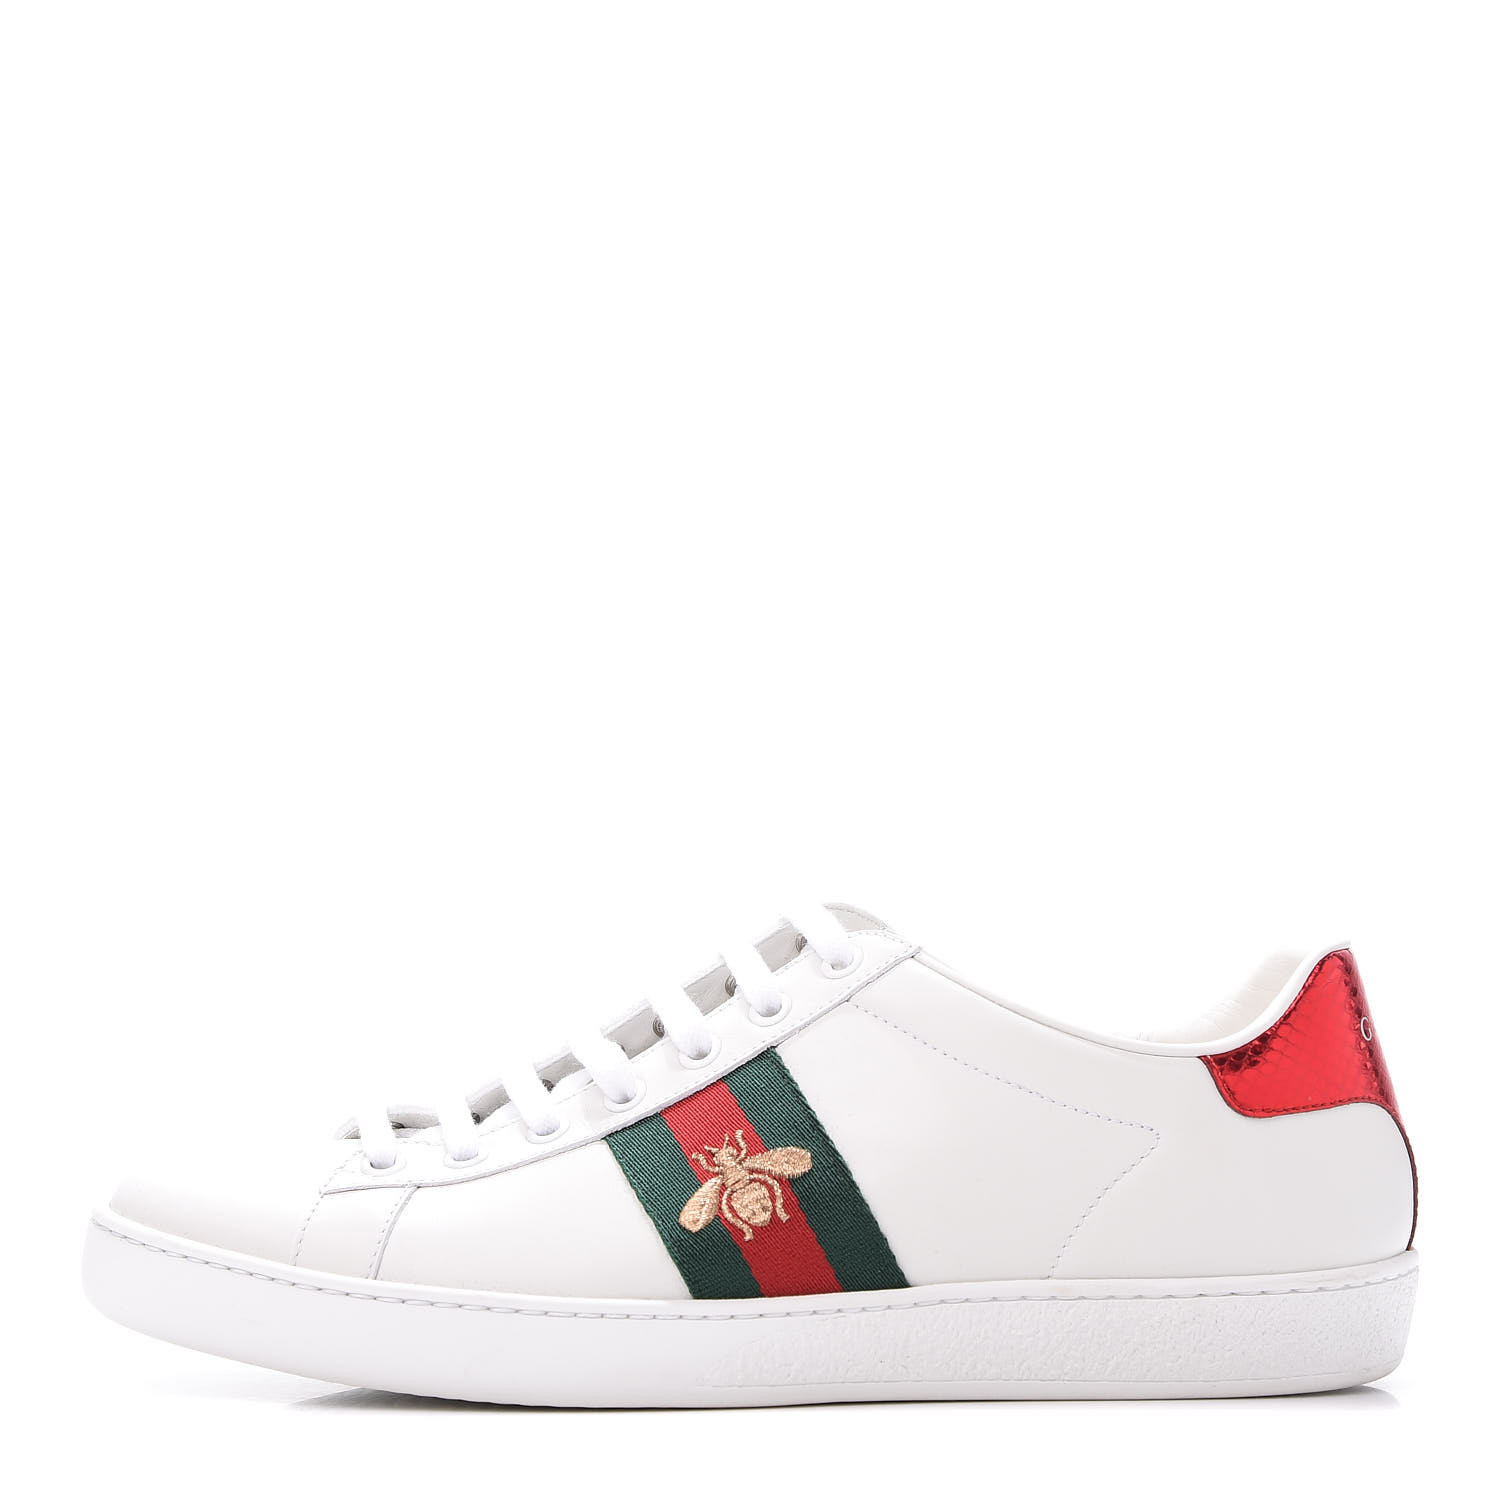 GUCCI Ayers Embroidered Ace Bee Star 